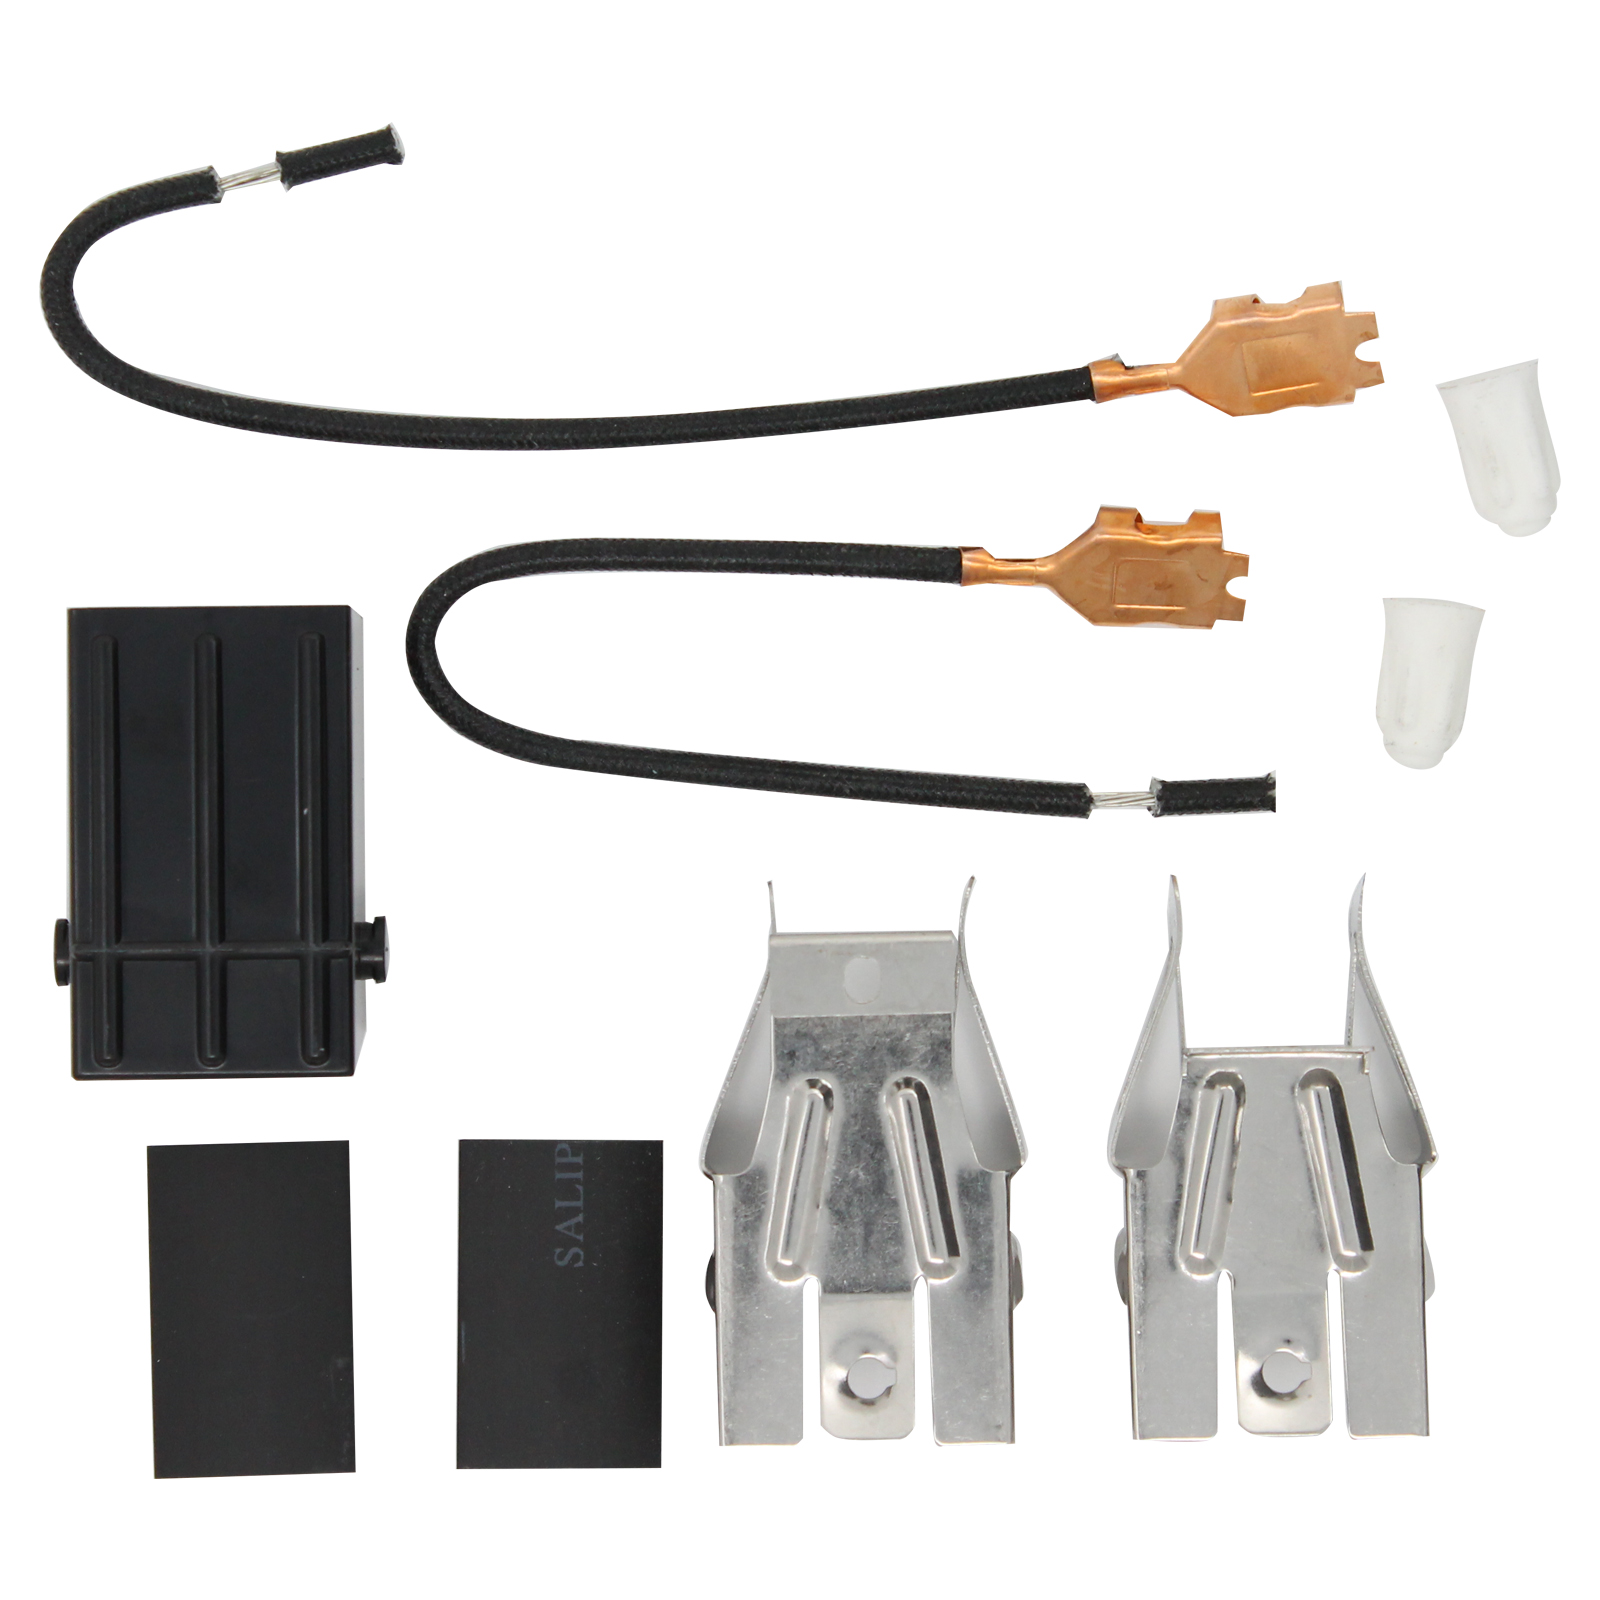 330031 Top Burner Receptacle Kit Replacement for Whirlpool RS6300XKW0 Range/Cooktop/Oven - Compatible with 330031 Range Burner Receptacle Kit - UpStart Components Brand - image 2 of 4